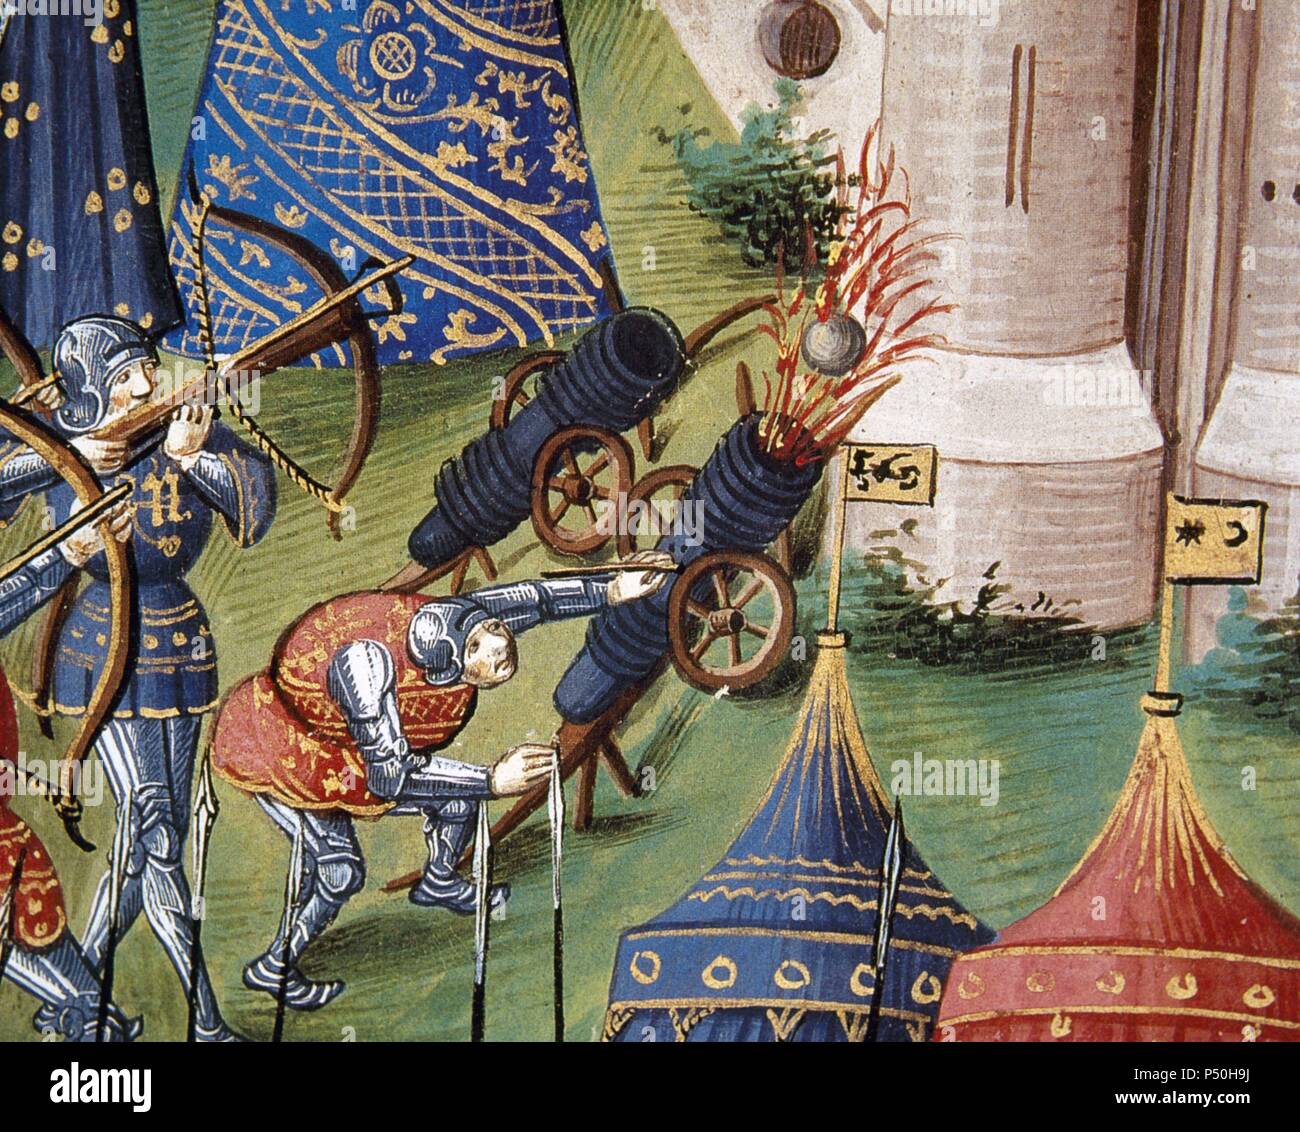 Medieval army. Artillery. Soldiers during a siege city. Guns and crossbows. Miniature. 15th century. Chateau of Chantilly. France. Stock Photo